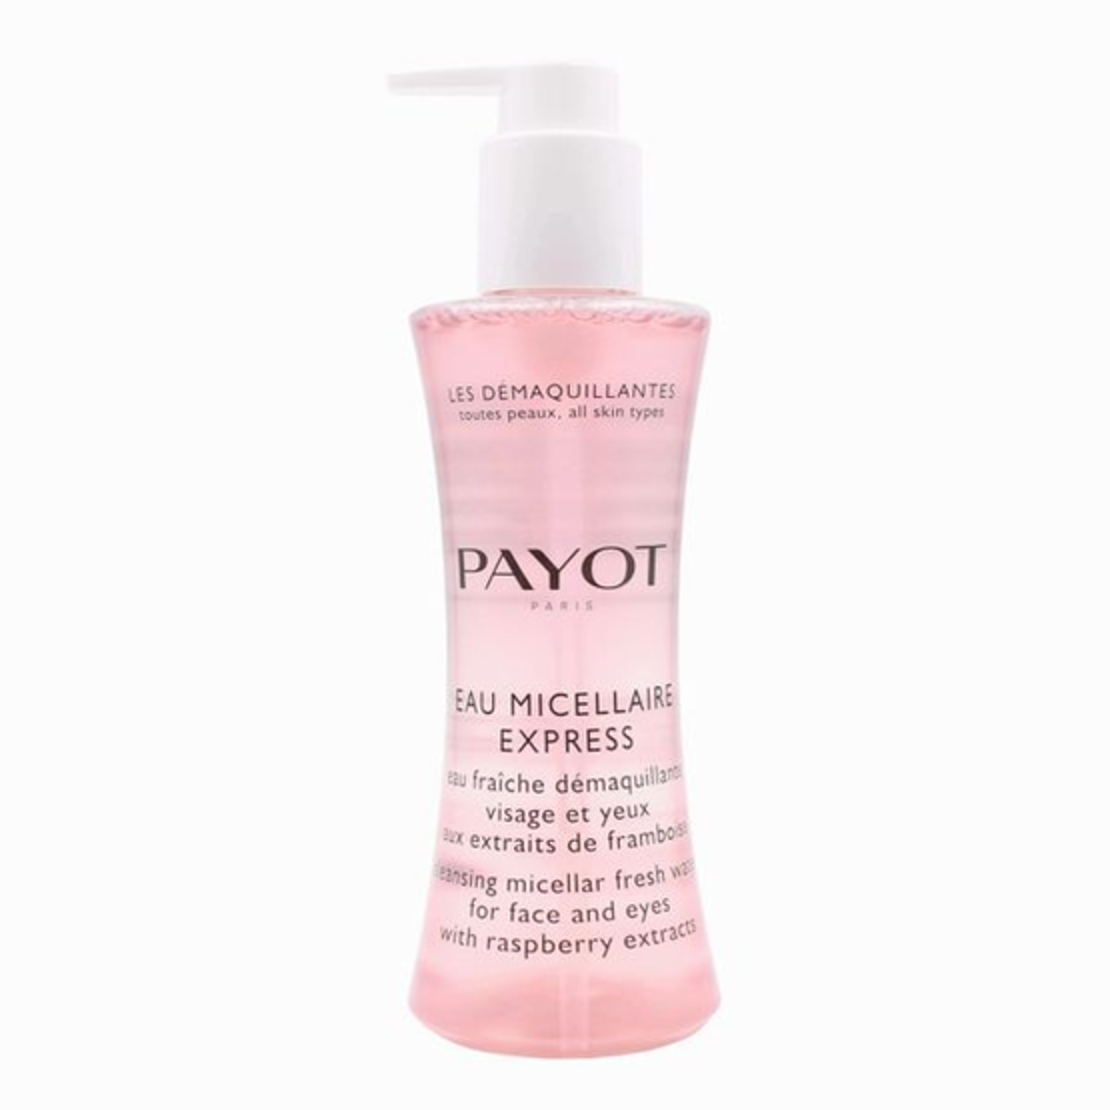 PAYOT MICELLAIRE EXPRESS | ONE PHARMACY